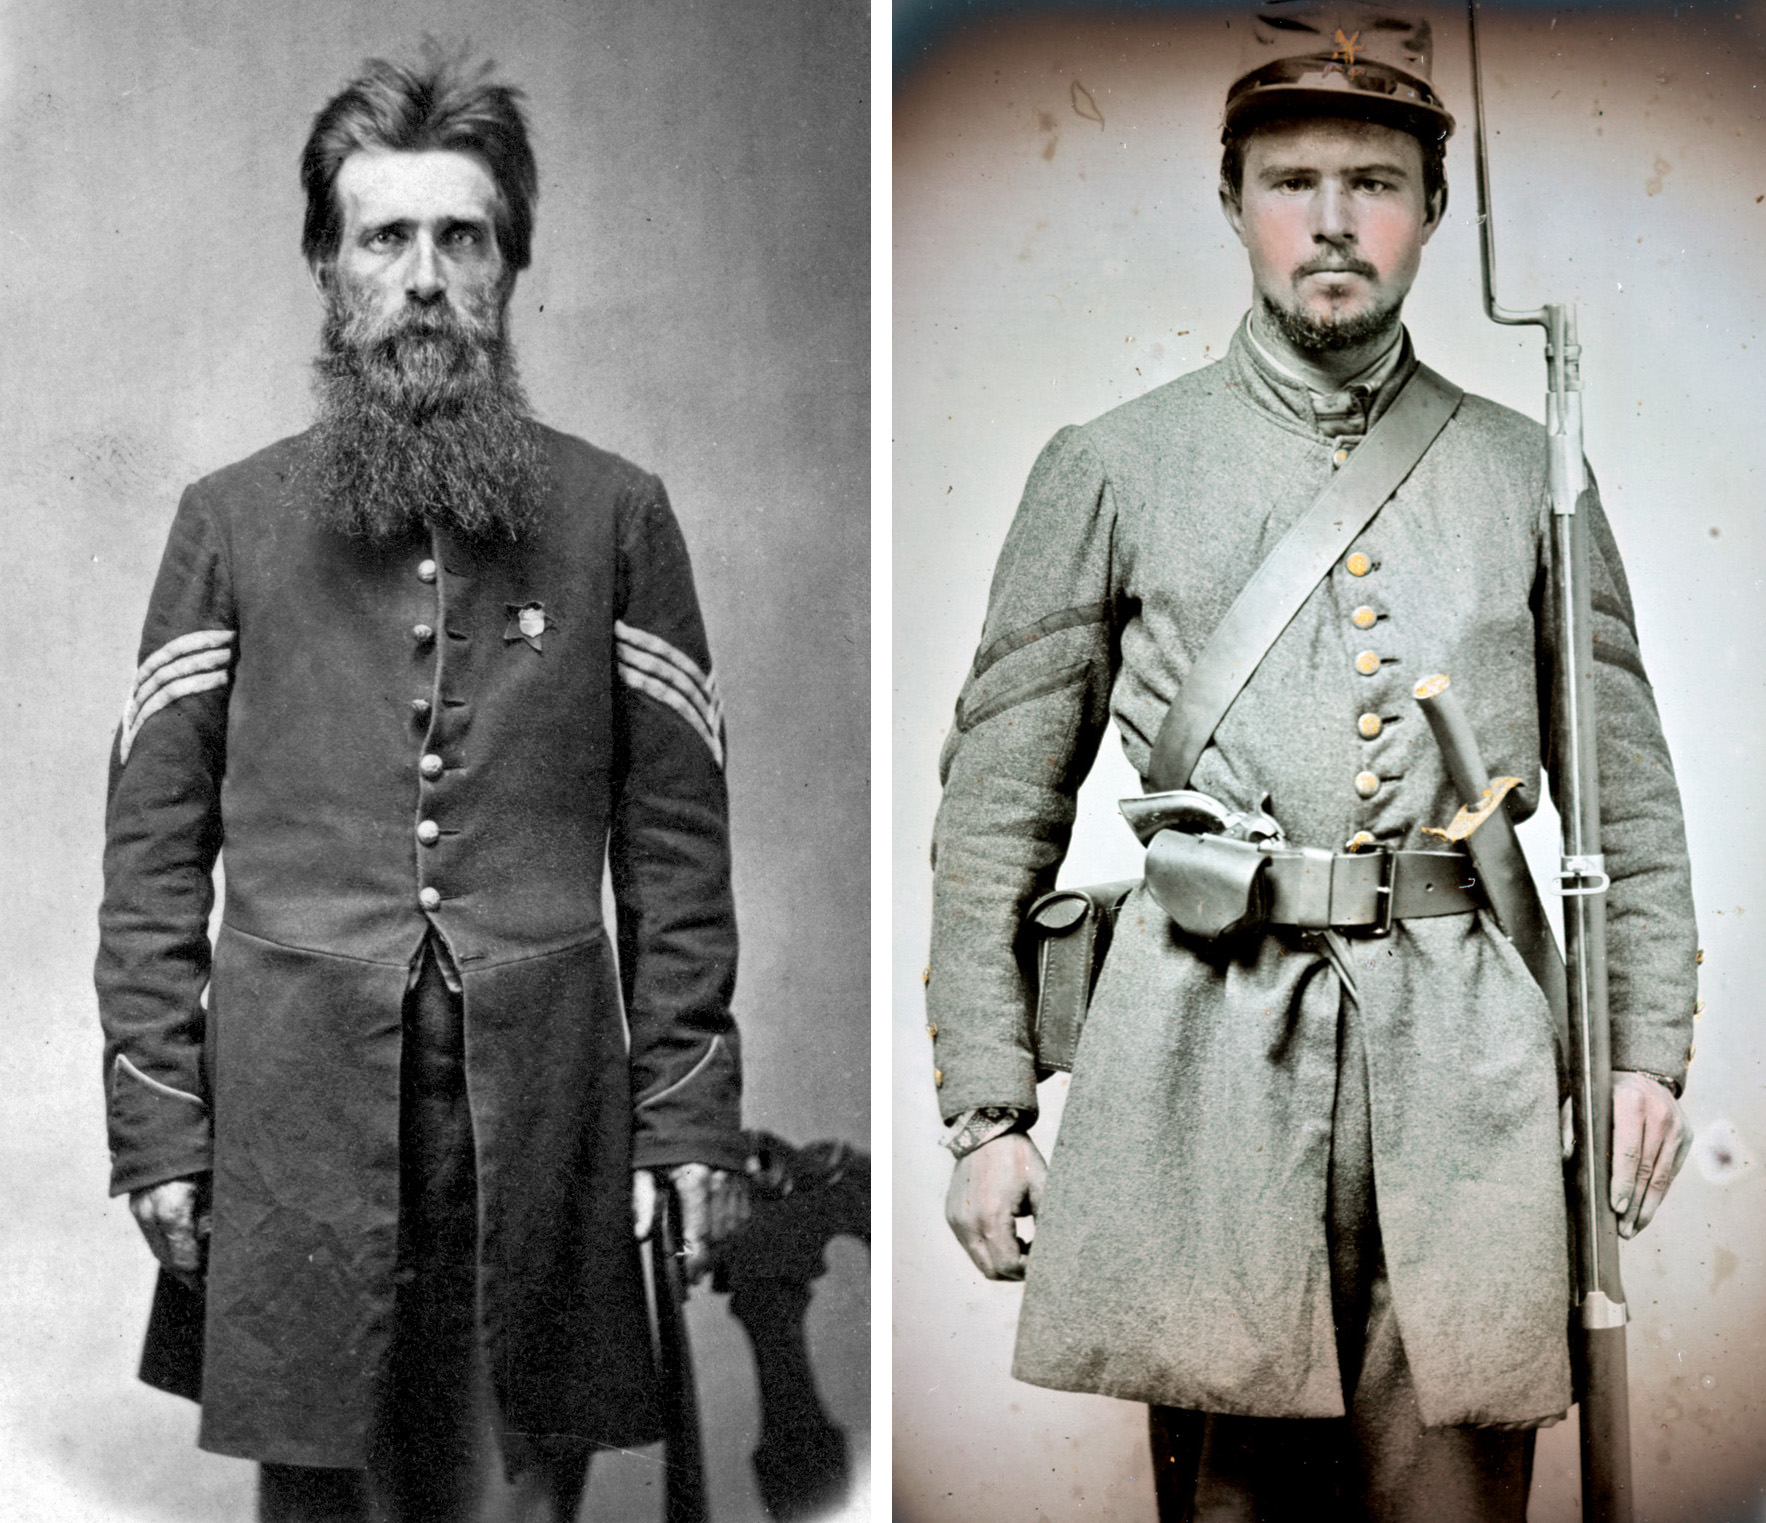 Lieutenant Washington L. Hicks (l) of the 28th New York Regiment of Crawford's brigade and Corporal C. Dorma Clarke of the 23rd Virginia Regiment of Colonel Taliaferro's brigade. Soldiers of both regiments found themselves in the thick of the fight.